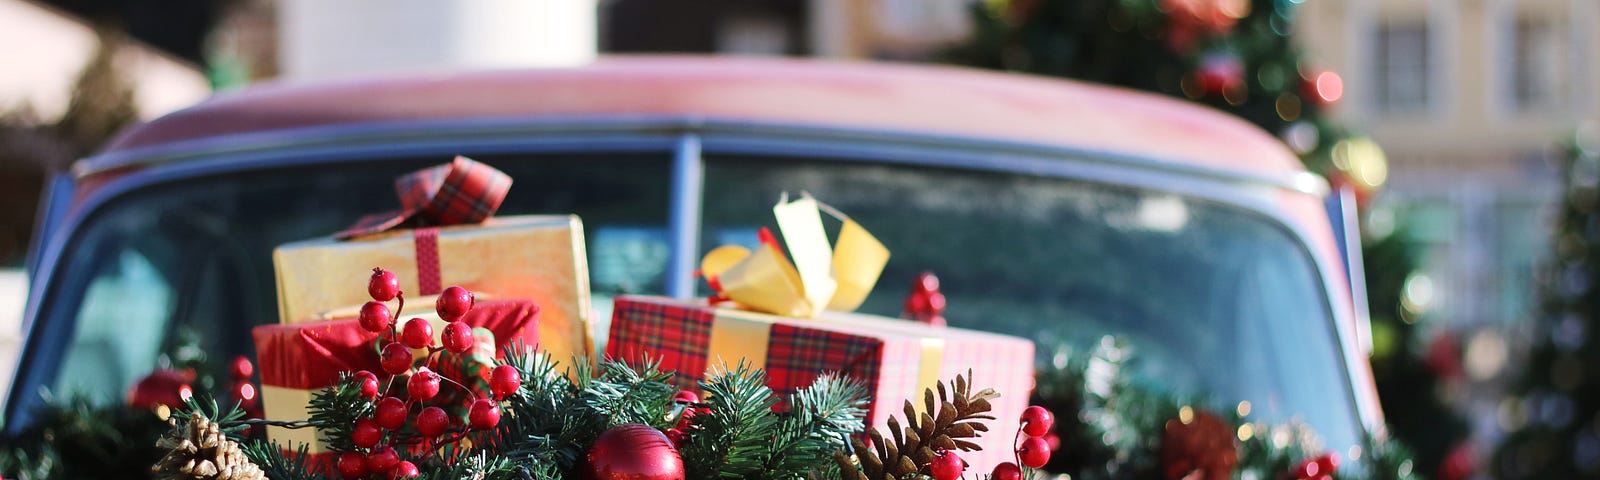 A red car with Christmas presents all over it. Photo by Honey Fangs on Unsplash